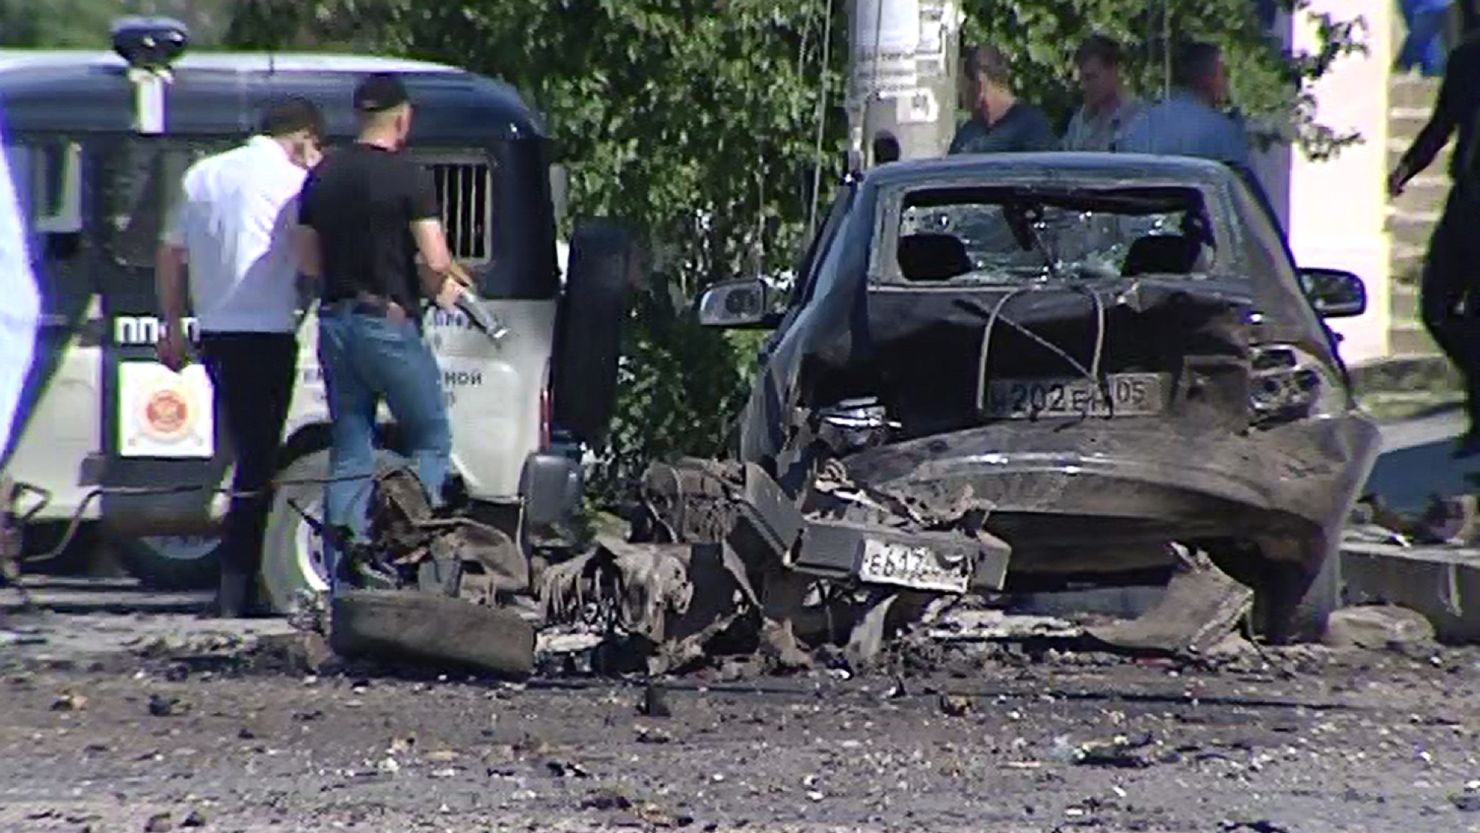 A video grab made on May 20, 2013 shows a blast site outside a building used by court bailiffs in central Makhachkala.